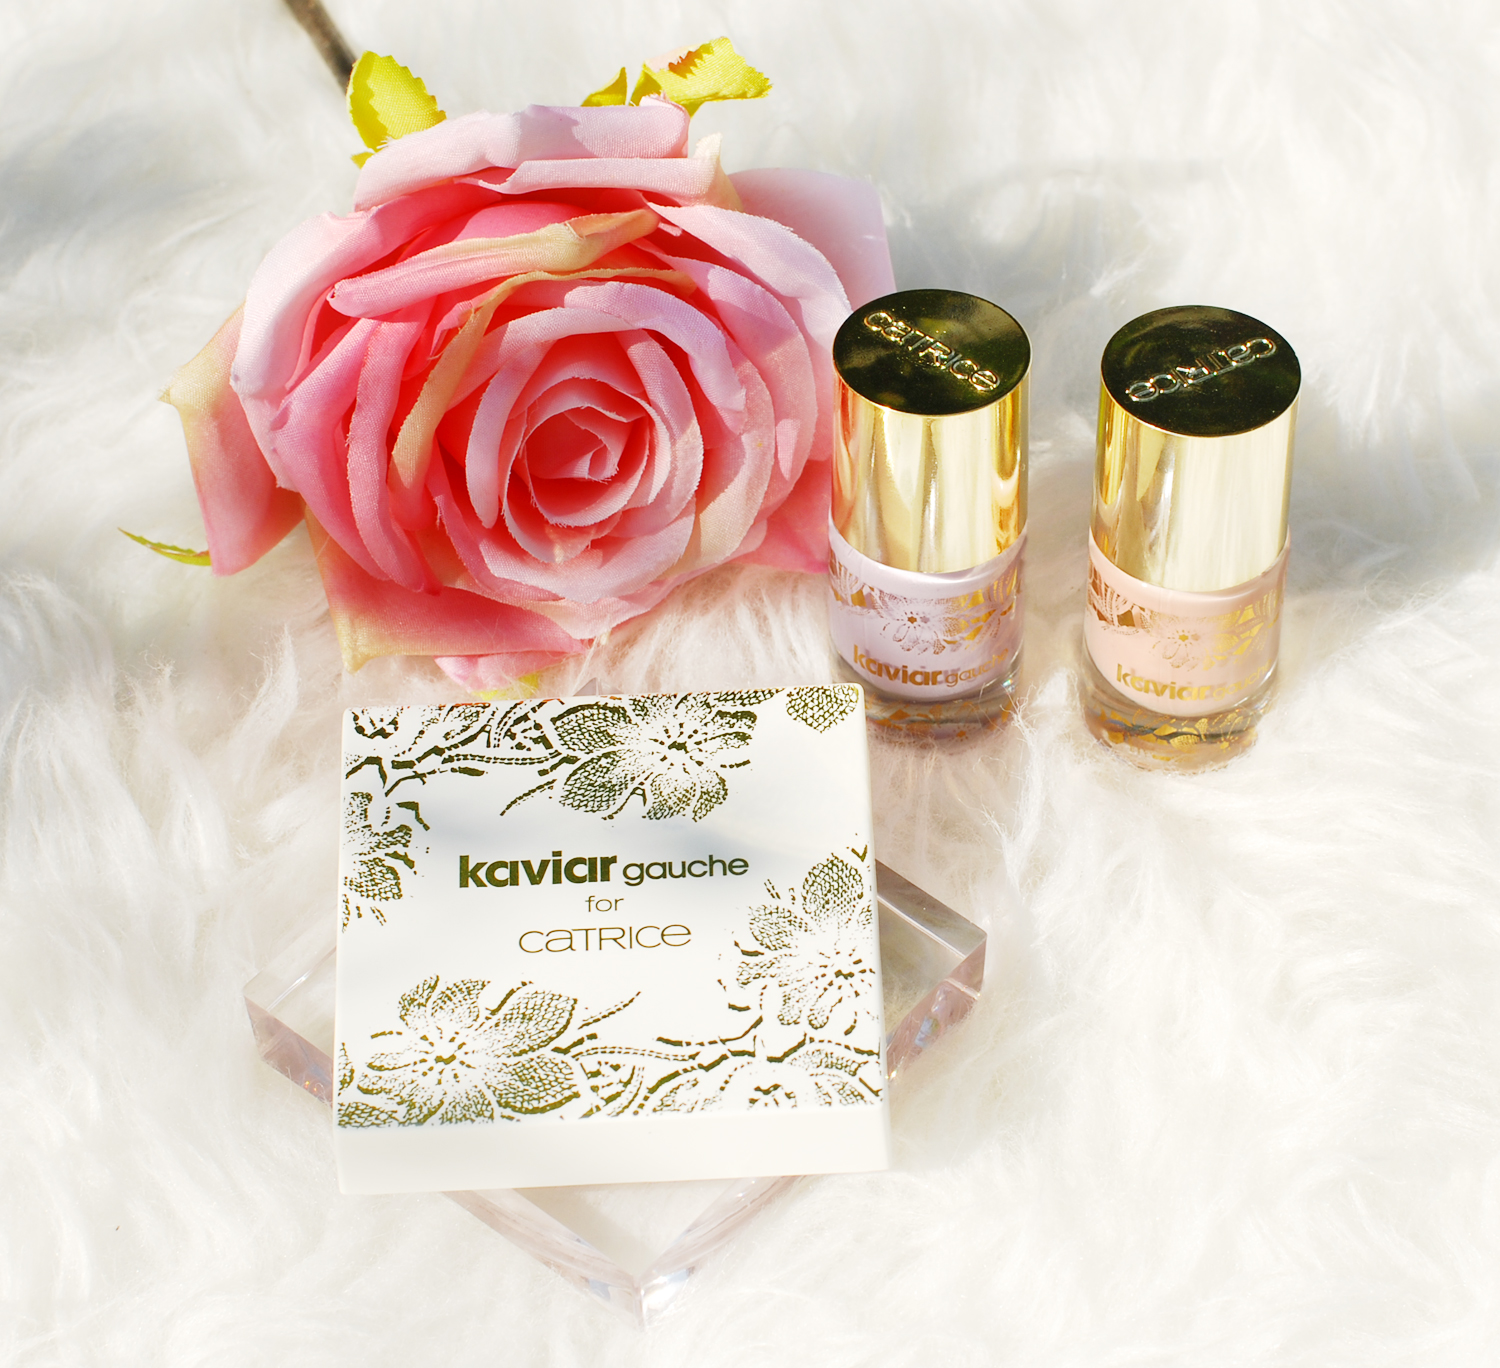 Kaviar Gauche for Catrice limited edition c01 sweet secret c02 honey blossom c03 love me tender review swatch lifestyle by linda